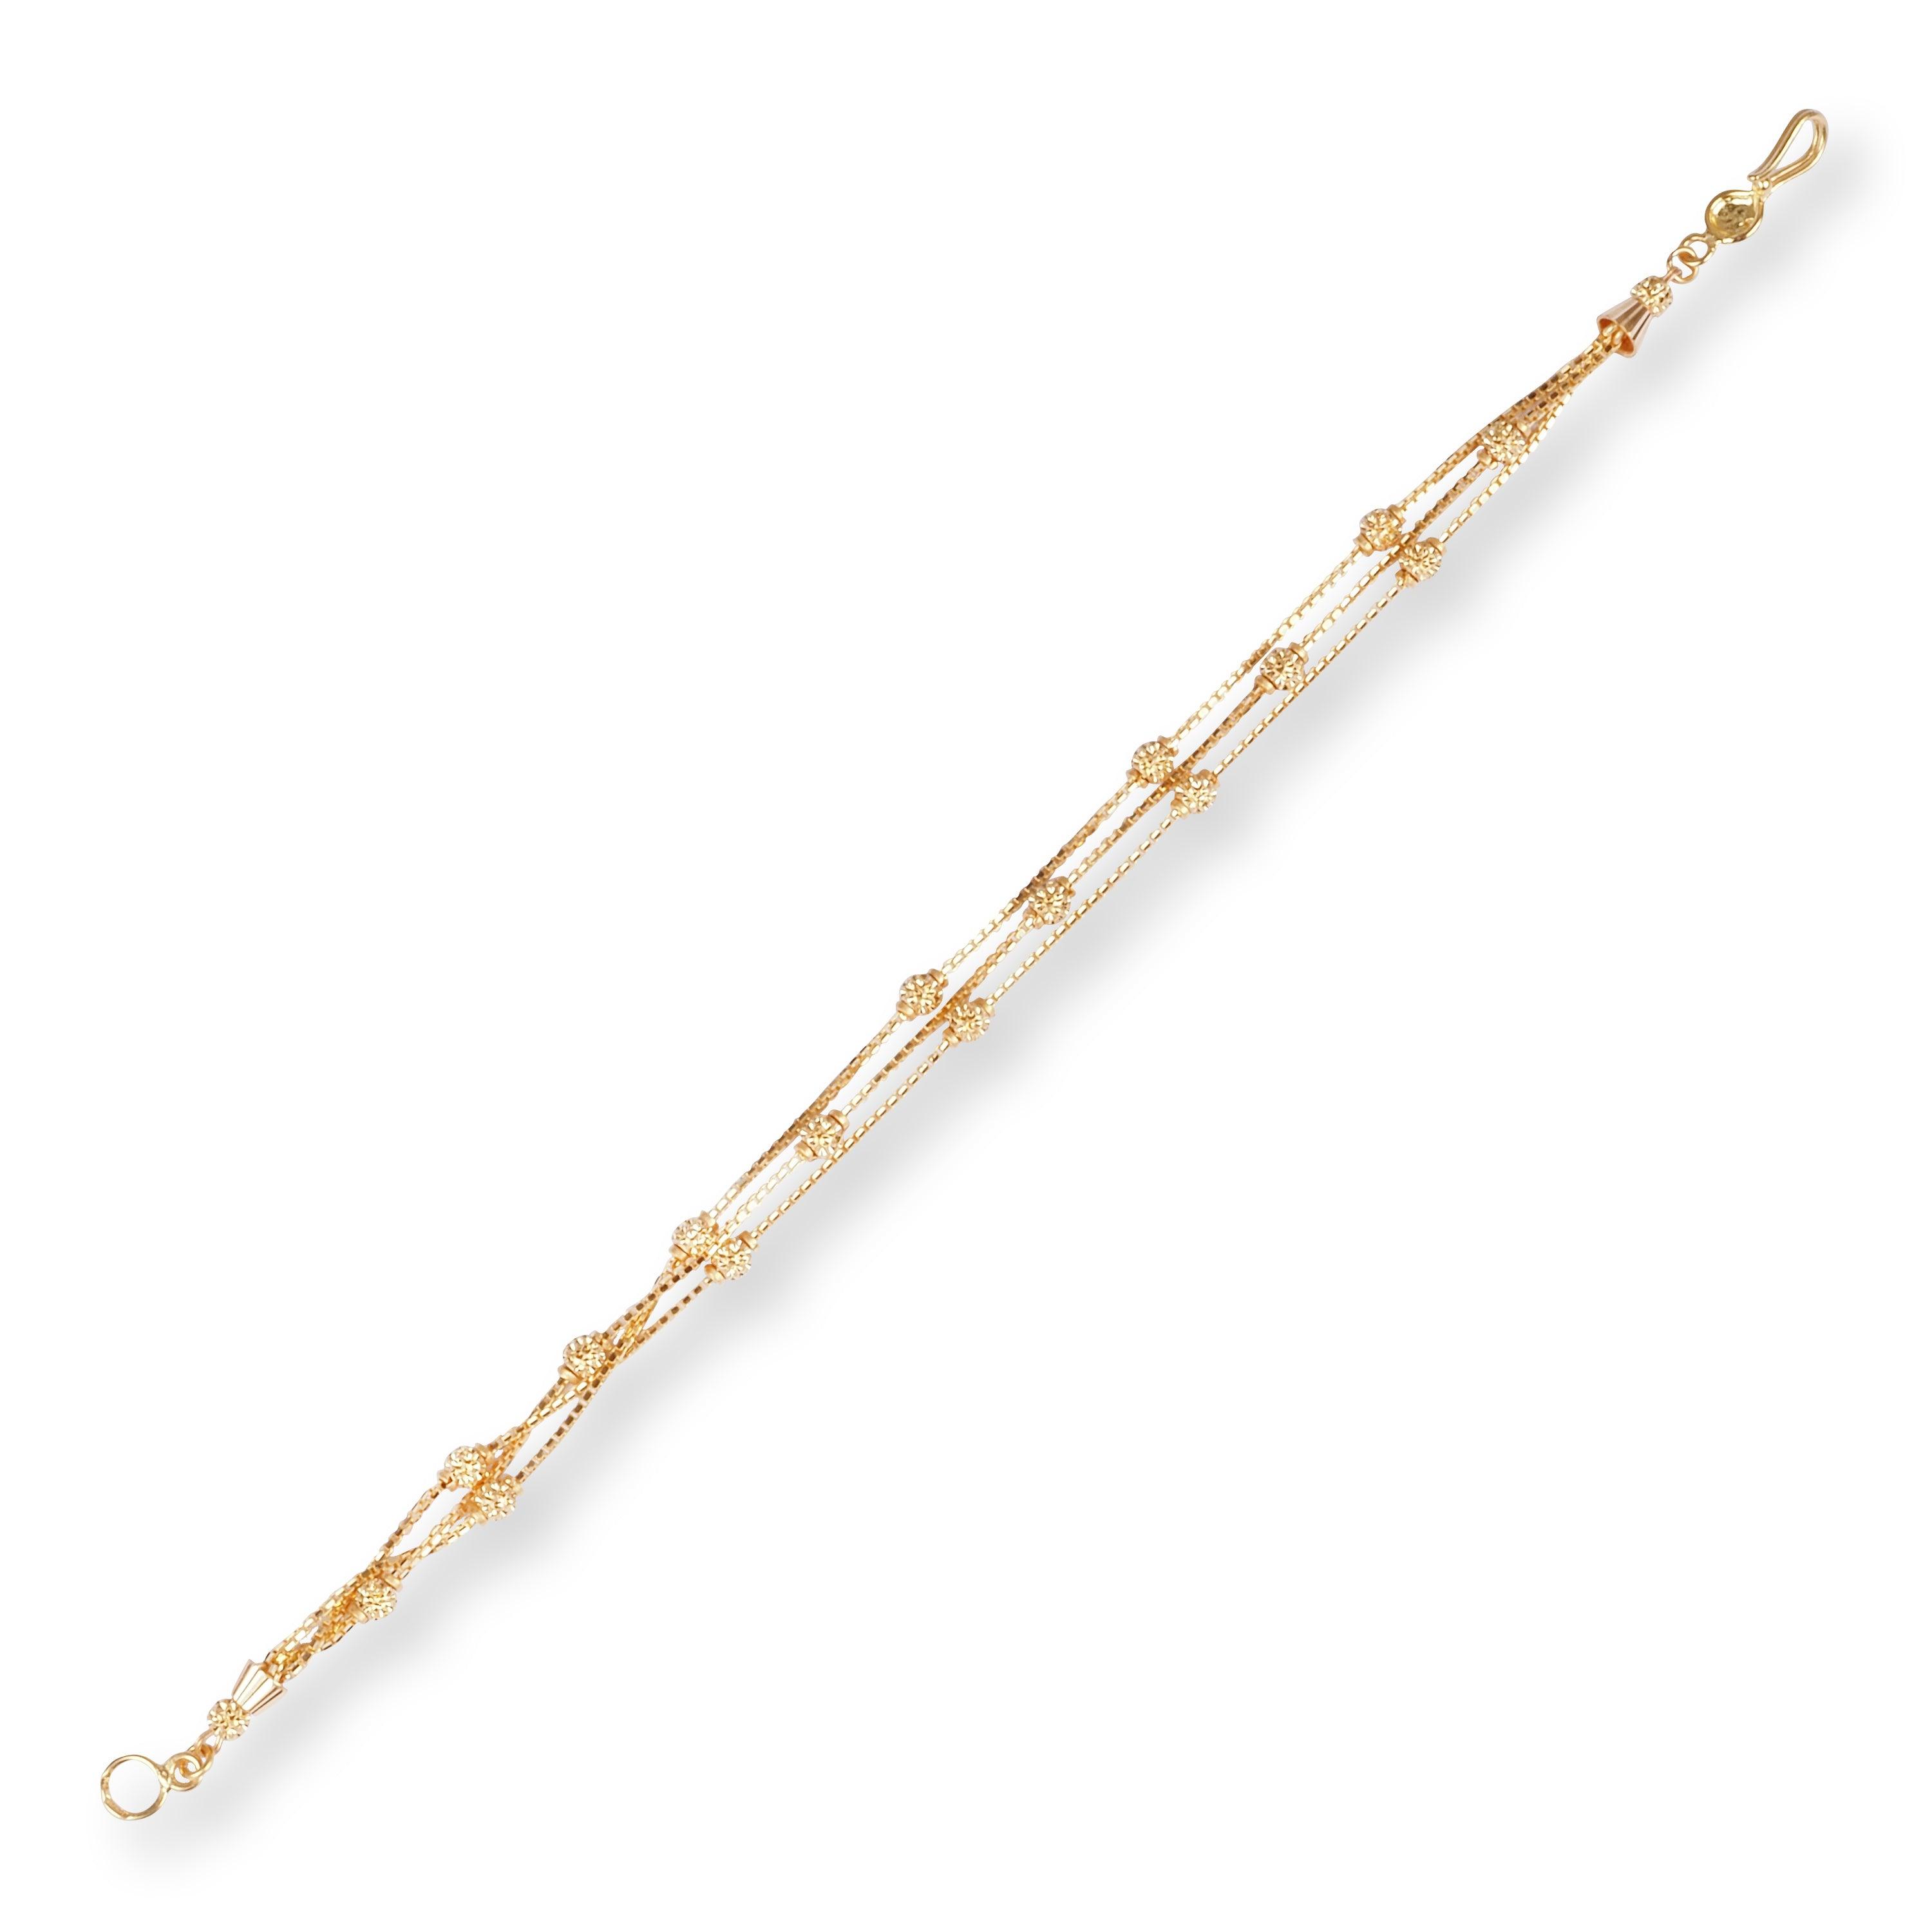 22ct Gold Three Row Bracelet with Diamond Cut Beads and Hook Clasp LBR-8493 - Minar Jewellers